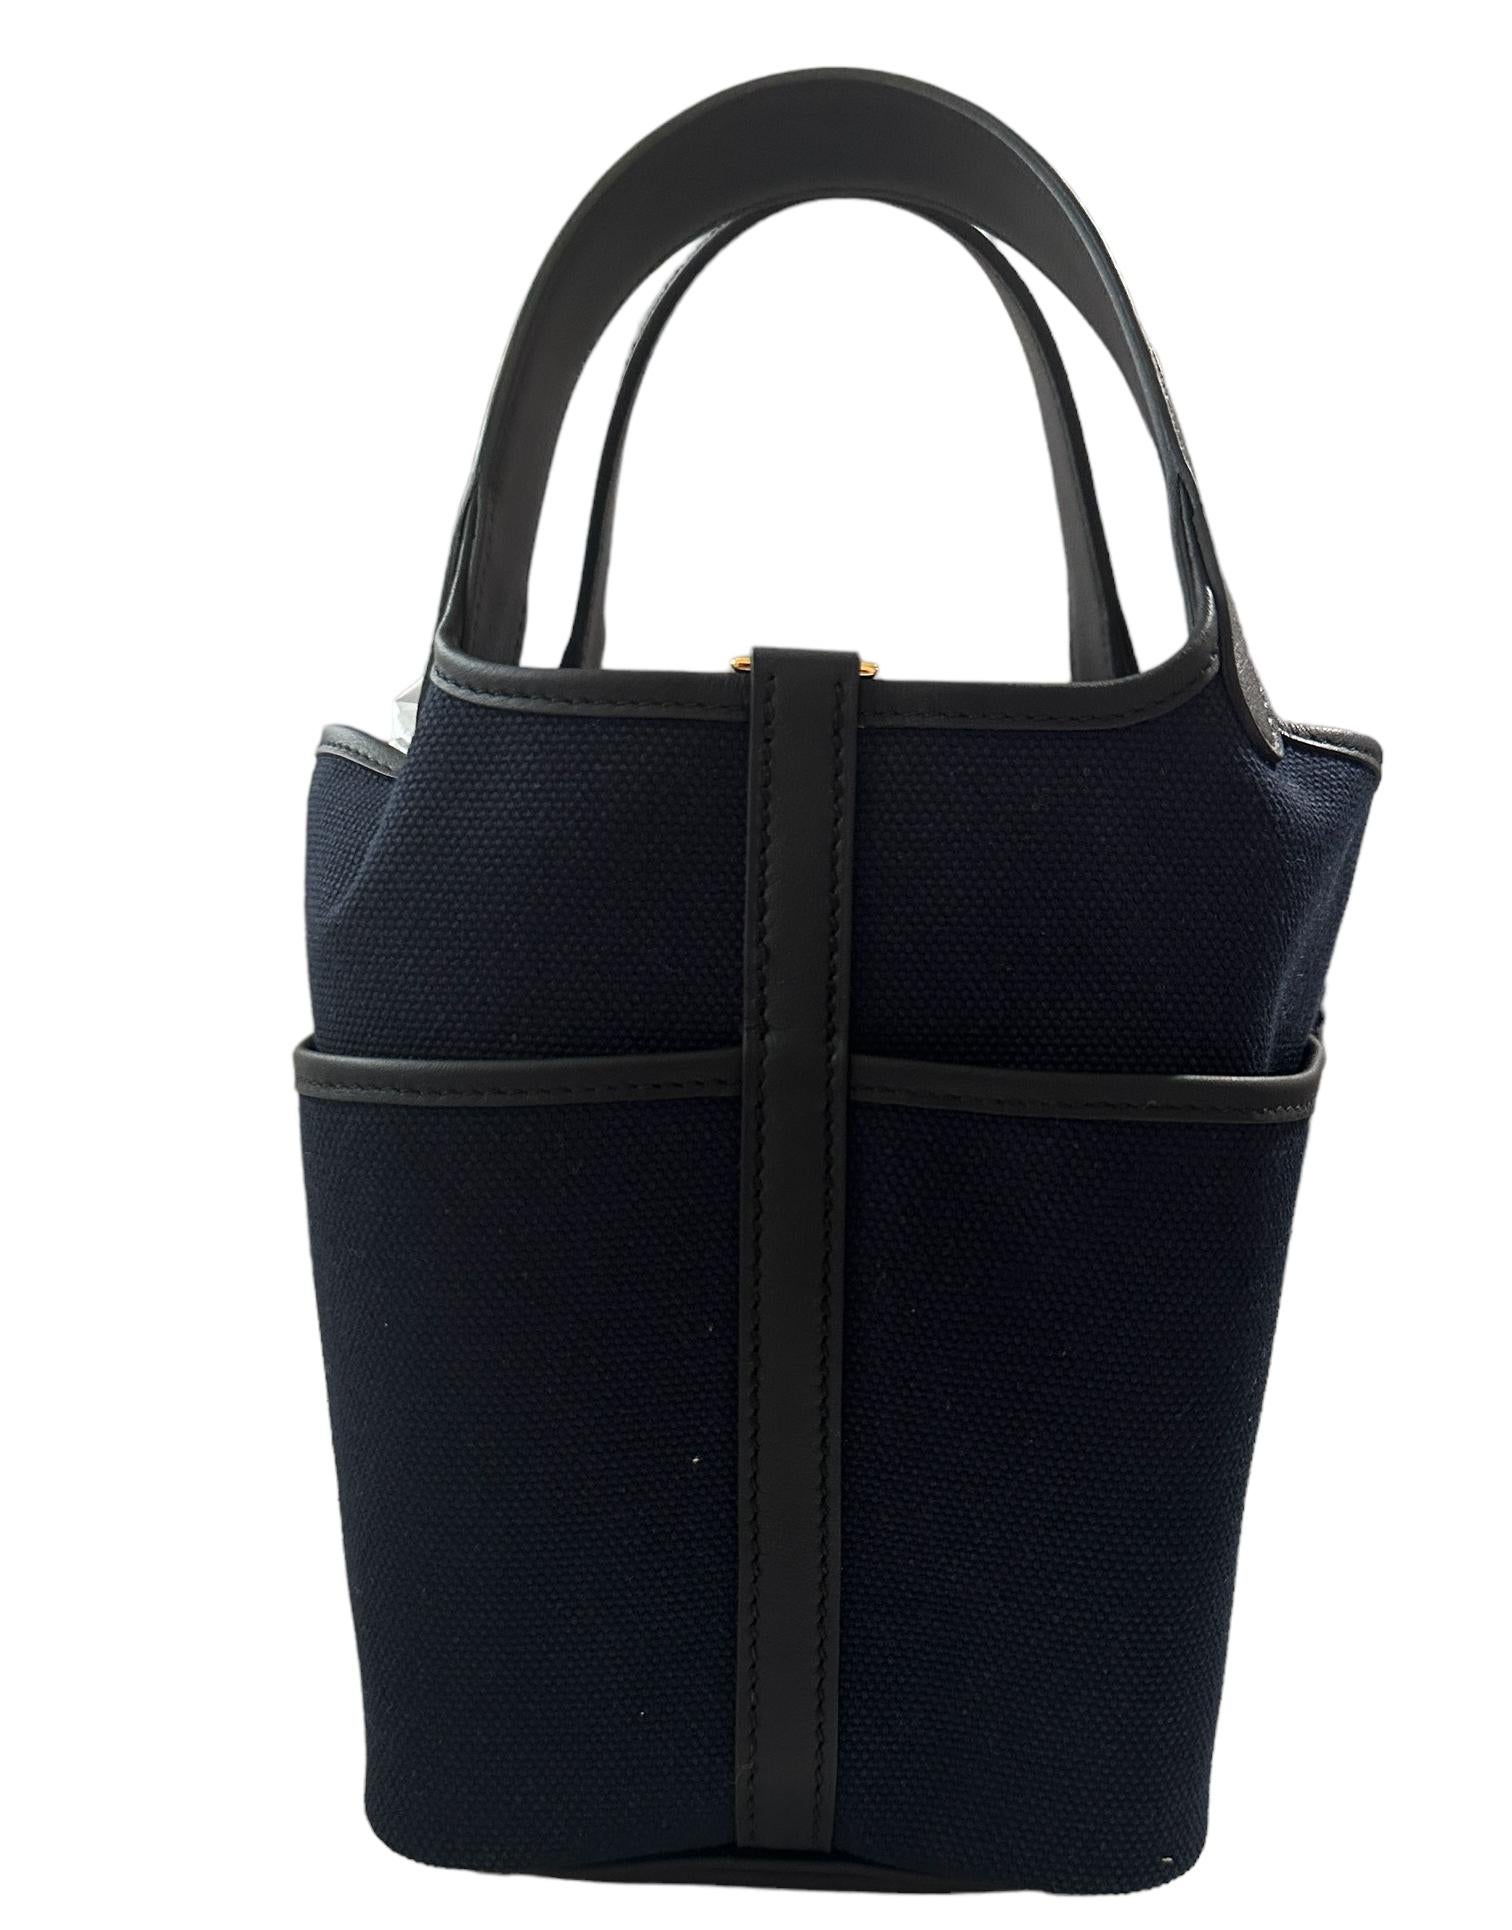 Hermes
New Cargo Picotin with Pocket
This Cargo Picotin Lock is in Bleu Marine and Black swift leather and toile with gold hardware and has tonal stitching, four exterior pockets with two top handles.

The interior is lined with natural leather, no